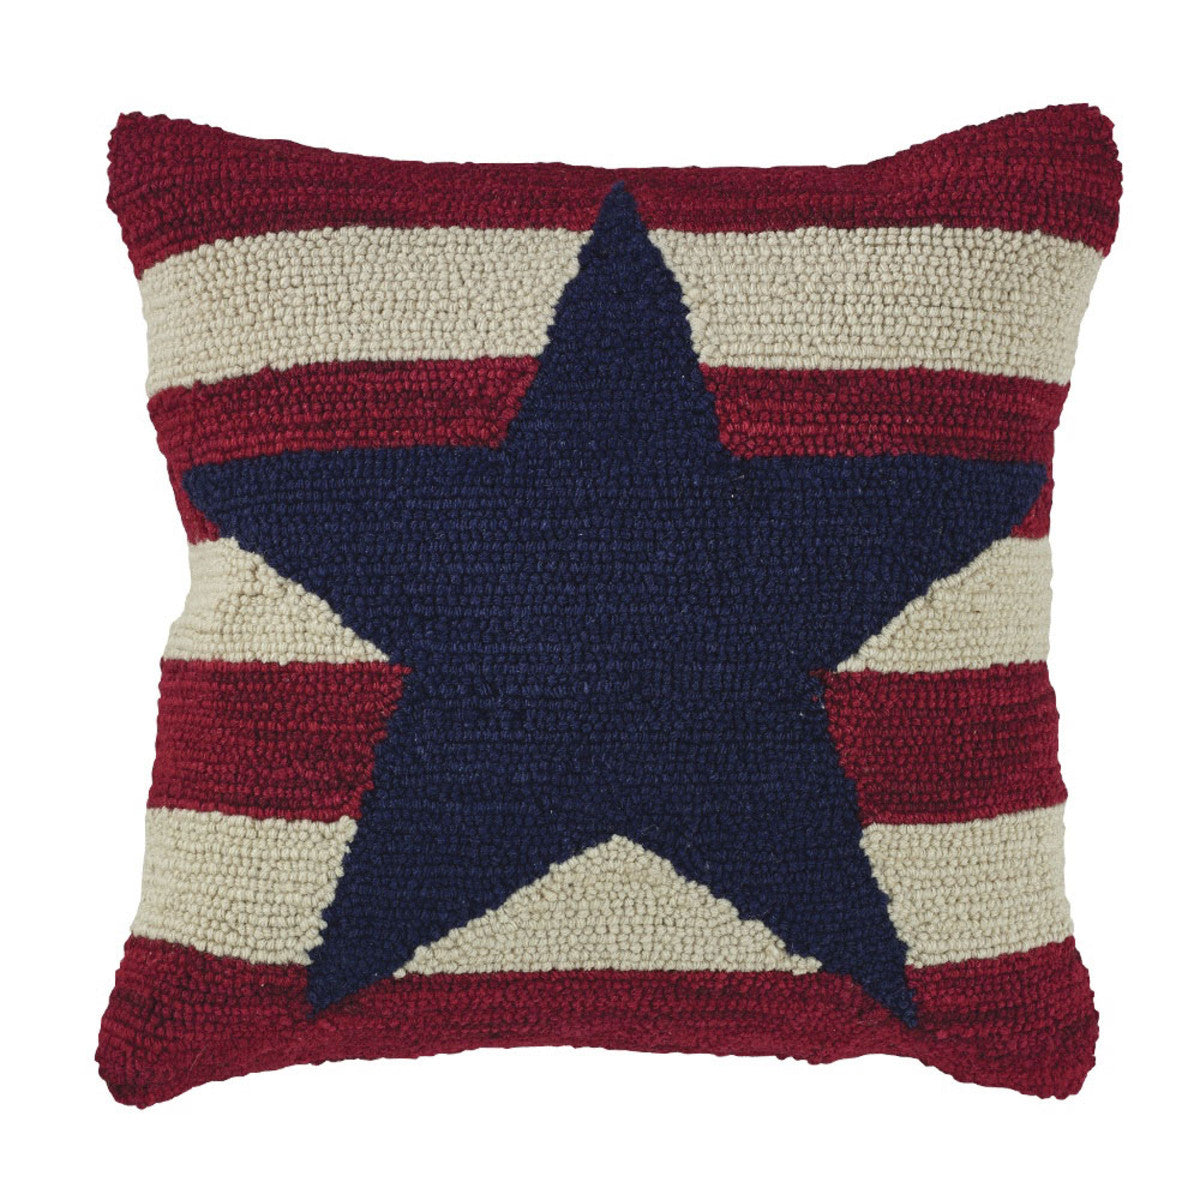 American Star Hooked Pillow Set Down Feather Fill 18"x18" - Park Designs